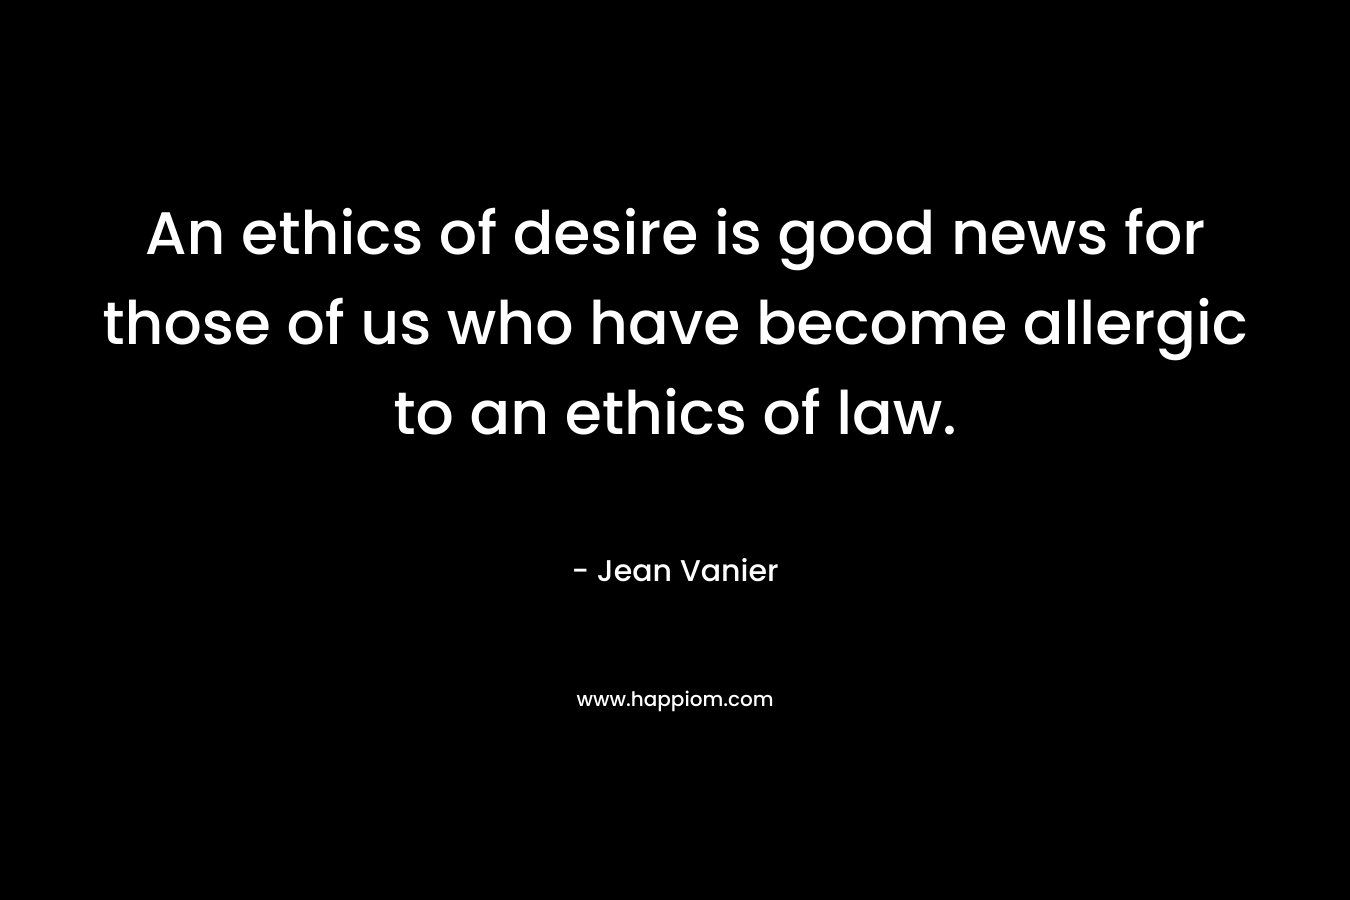 An ethics of desire is good news for those of us who have become allergic to an ethics of law. – Jean Vanier